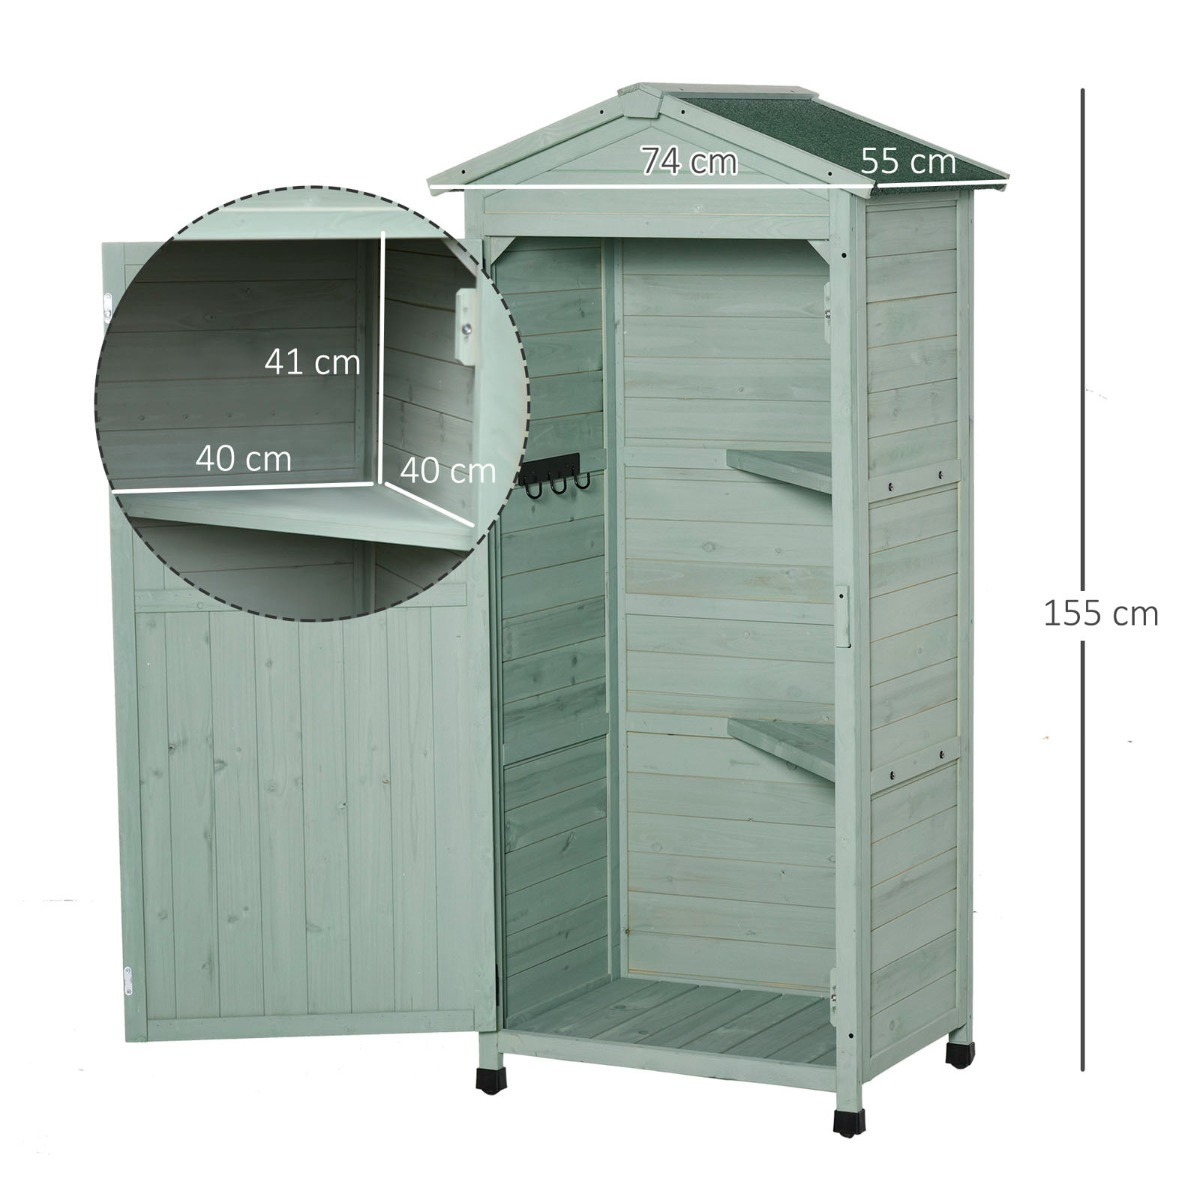 Outsunny Wooden Garden Storage Shed Cabinet, Sage - Tall>